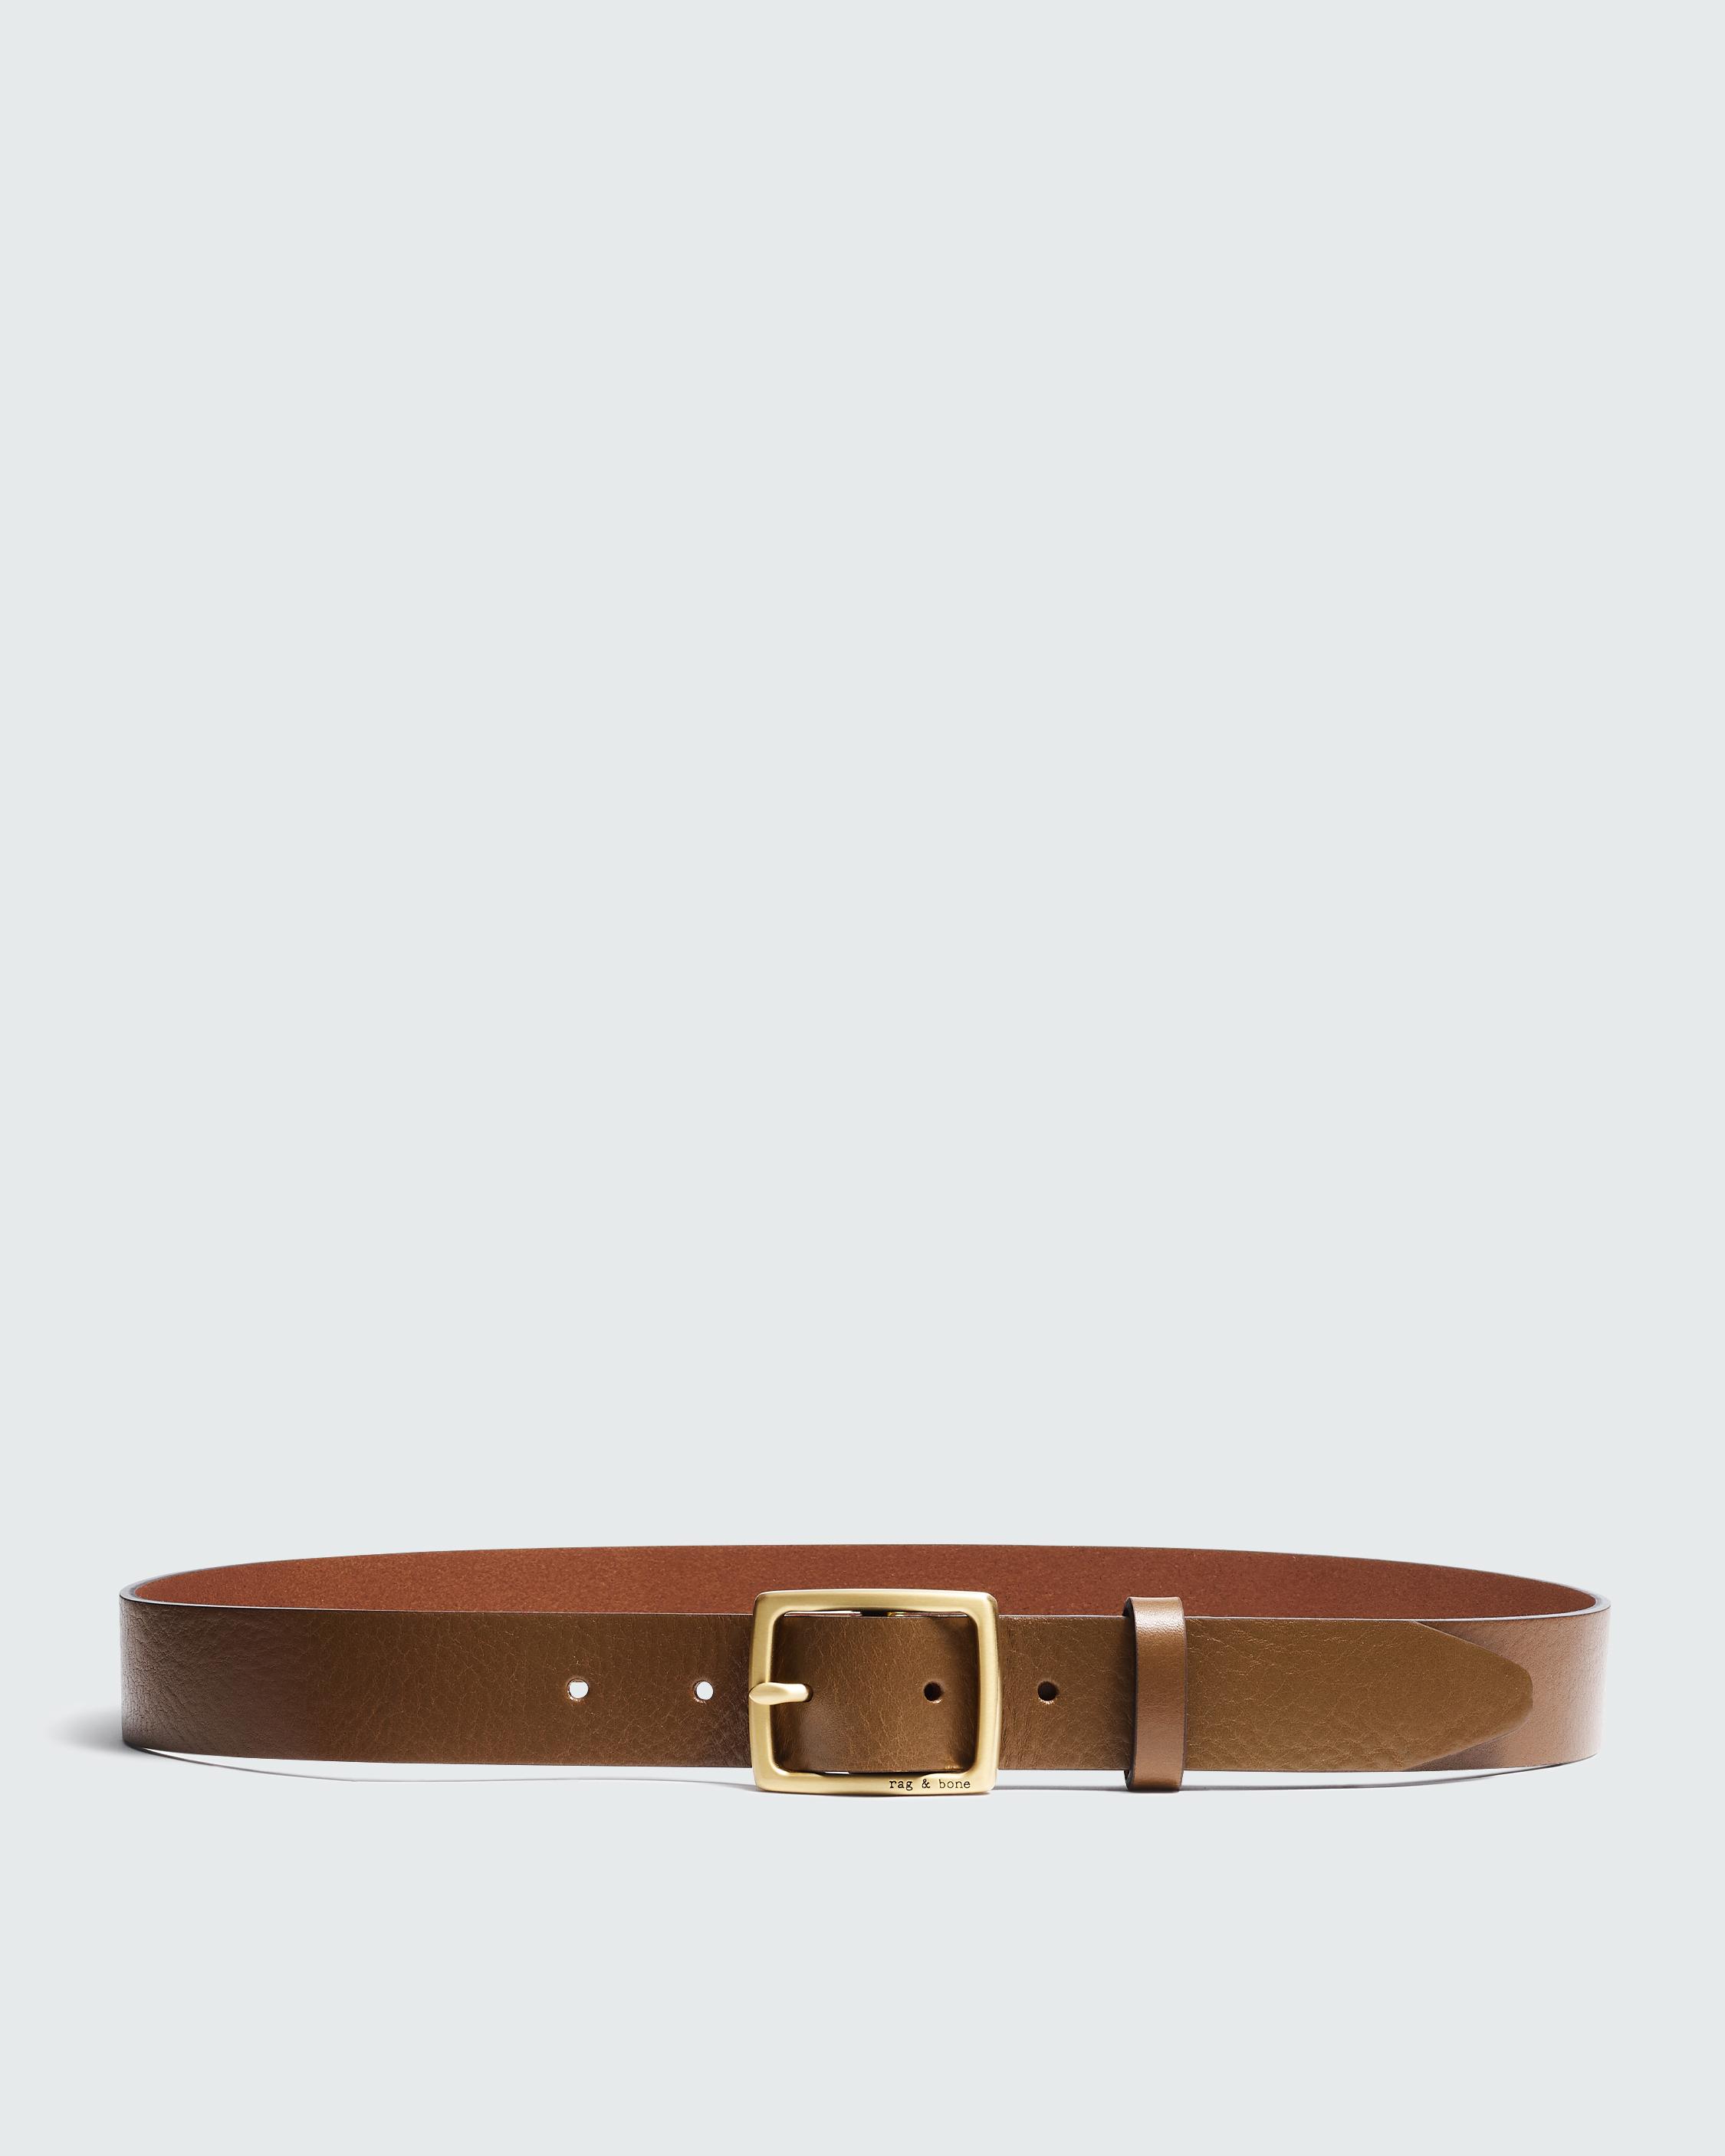 Belts for Women: Suede to Studded to Braided | rag & bone